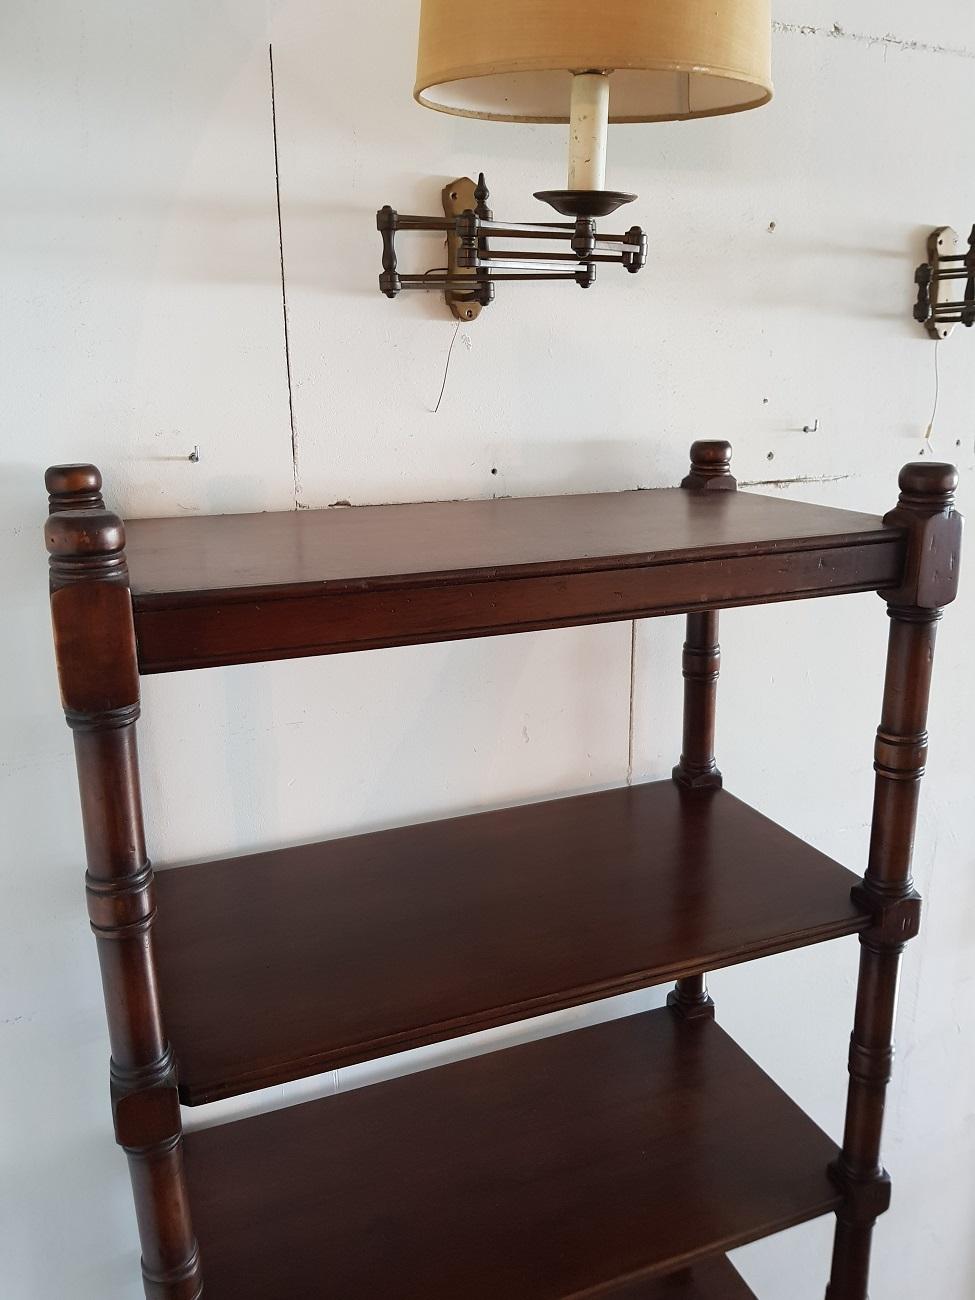 Late 20th century mahogany open étagère with six shelves, it can be stand free because it's finished all around. A good looking item to use as a room divider for displaying your lovely items. It has some wear on the shelves consistent by age and